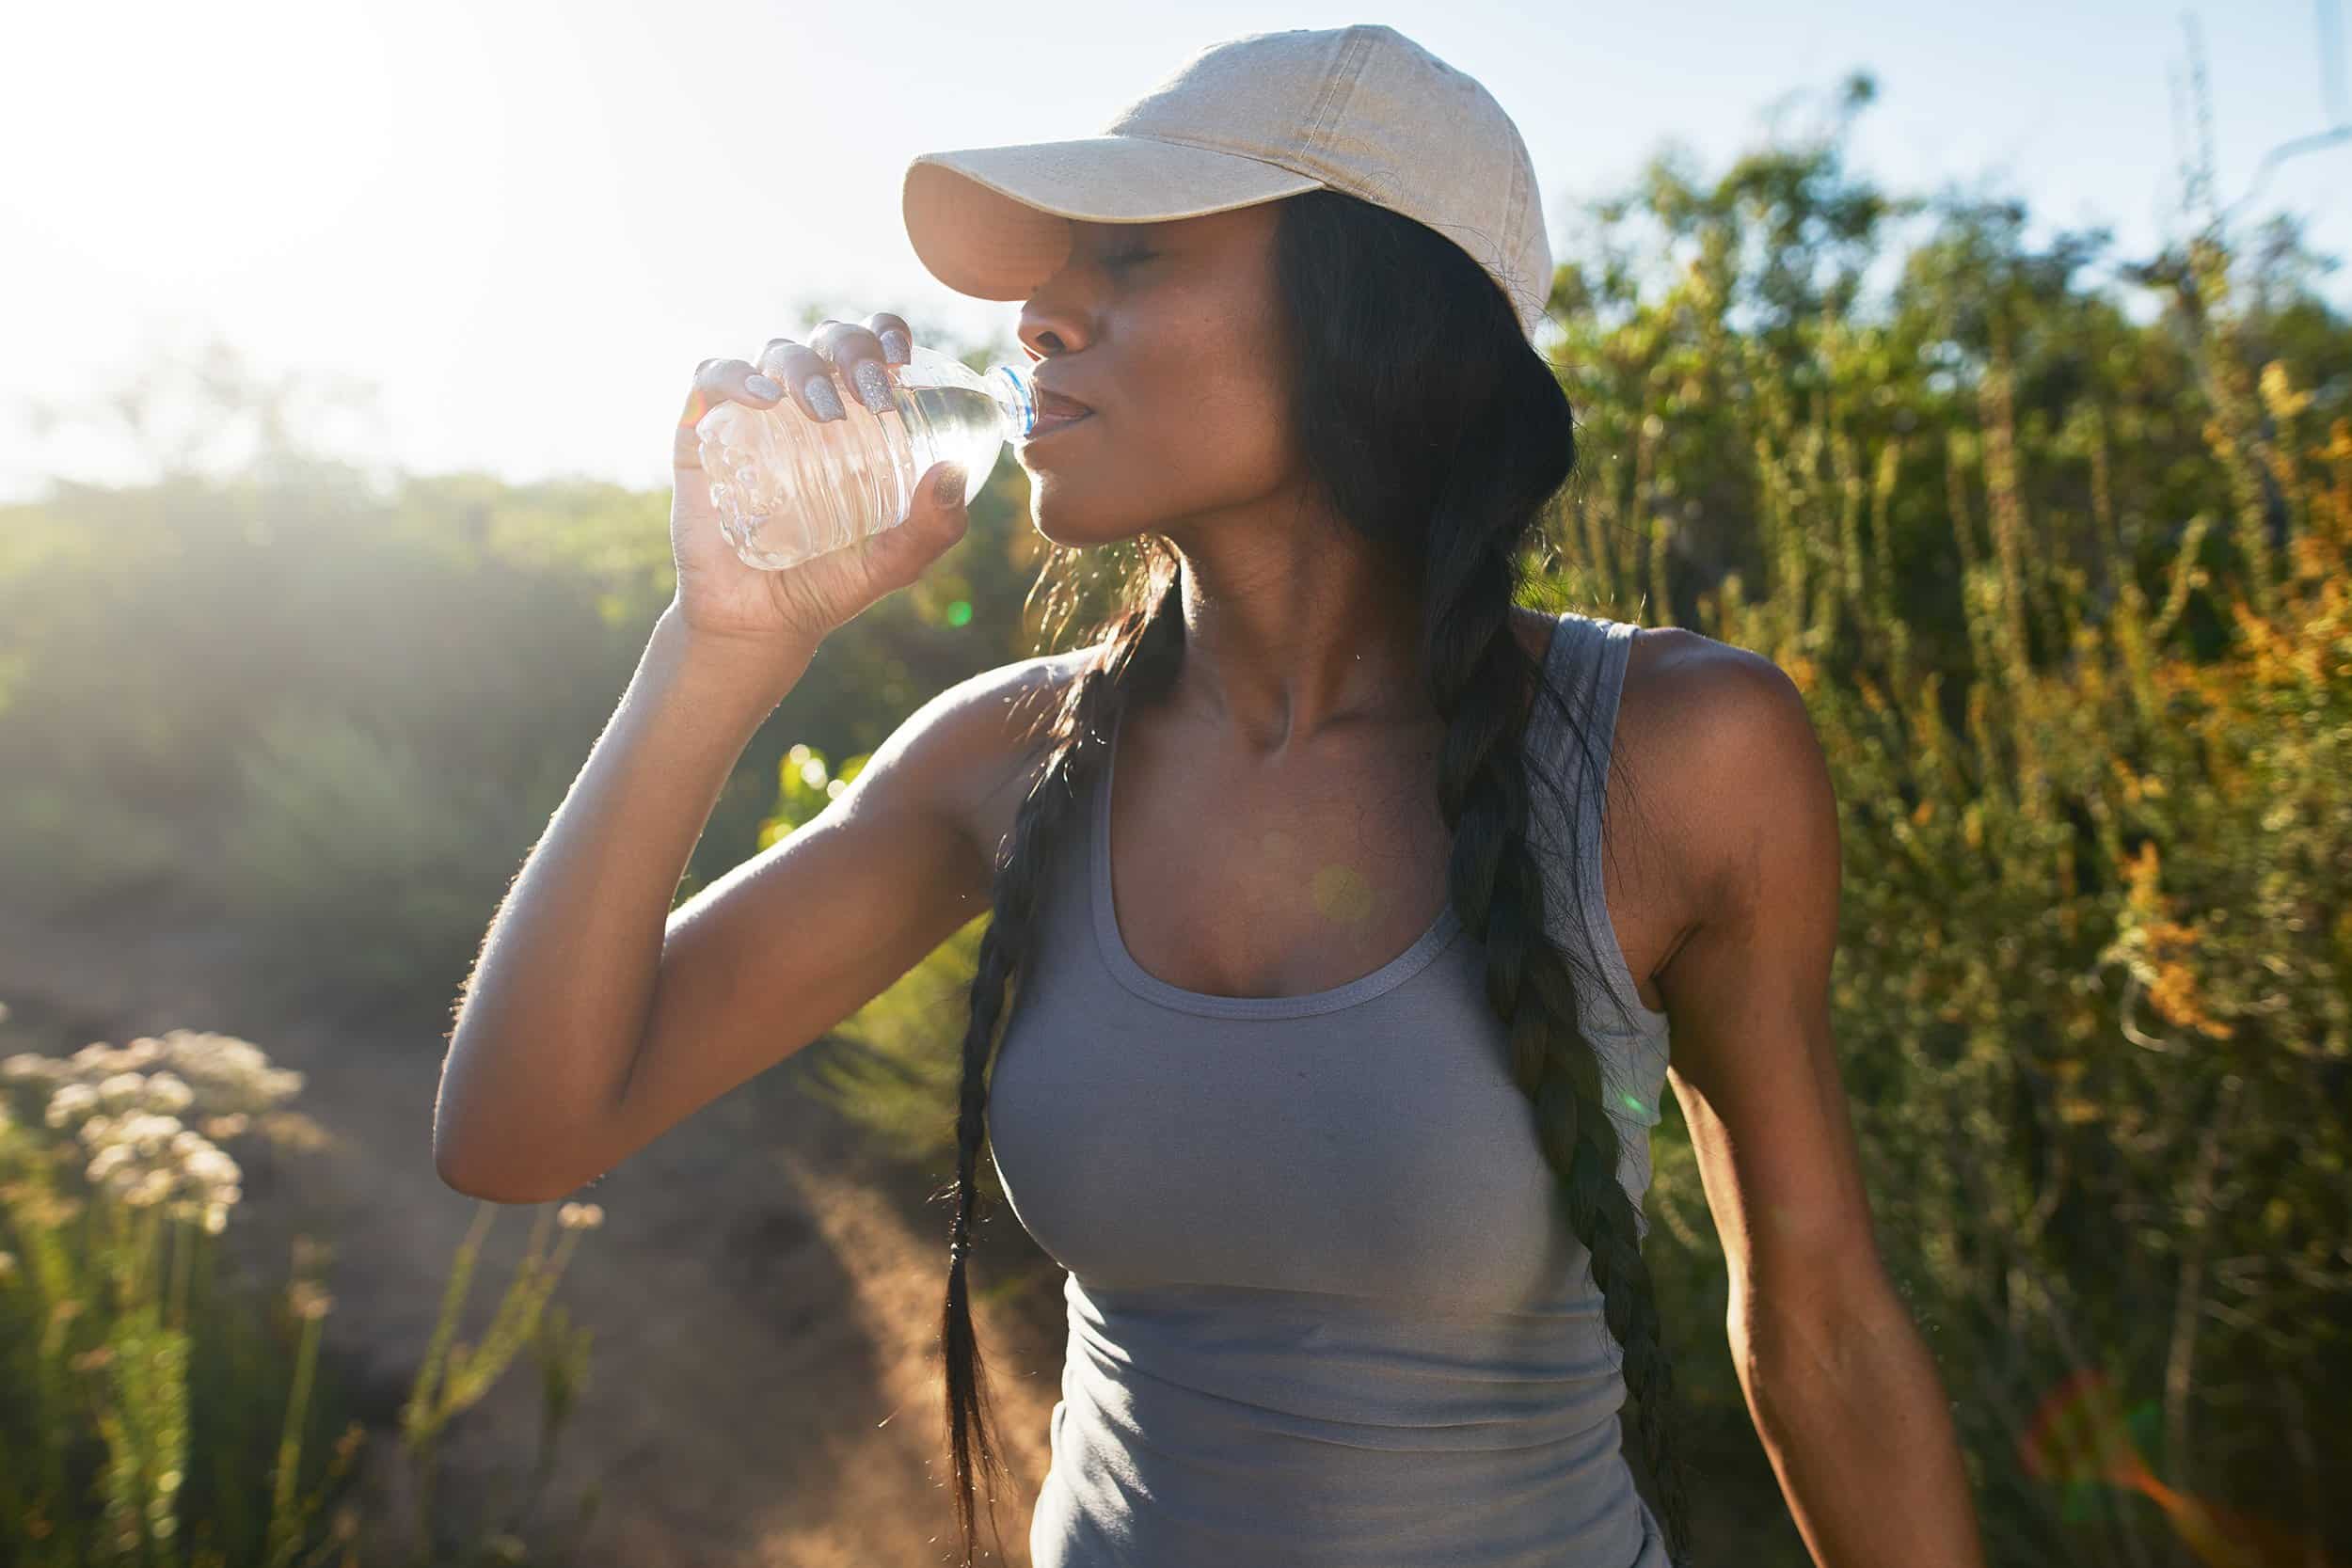 A woman looking refreshed and joyful as she hydrates during her run